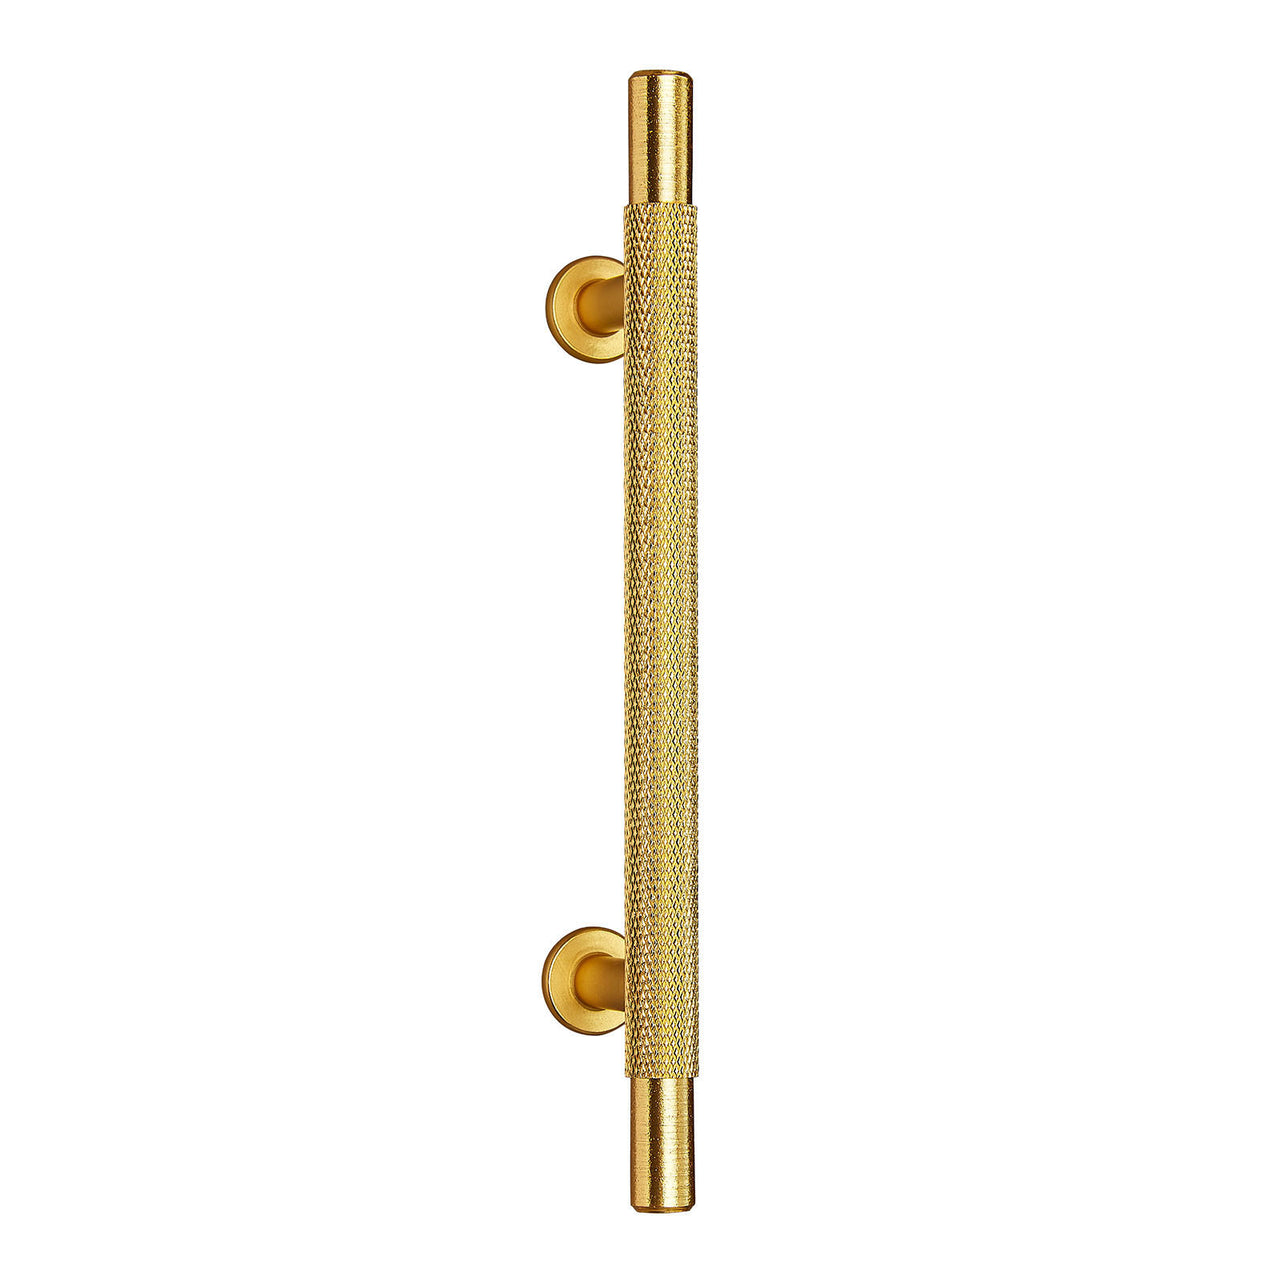 Knurled Satin Brass T-Bar Drawer/Cabinet Pull Handle - 96mm, 128mm, 192mm Centres